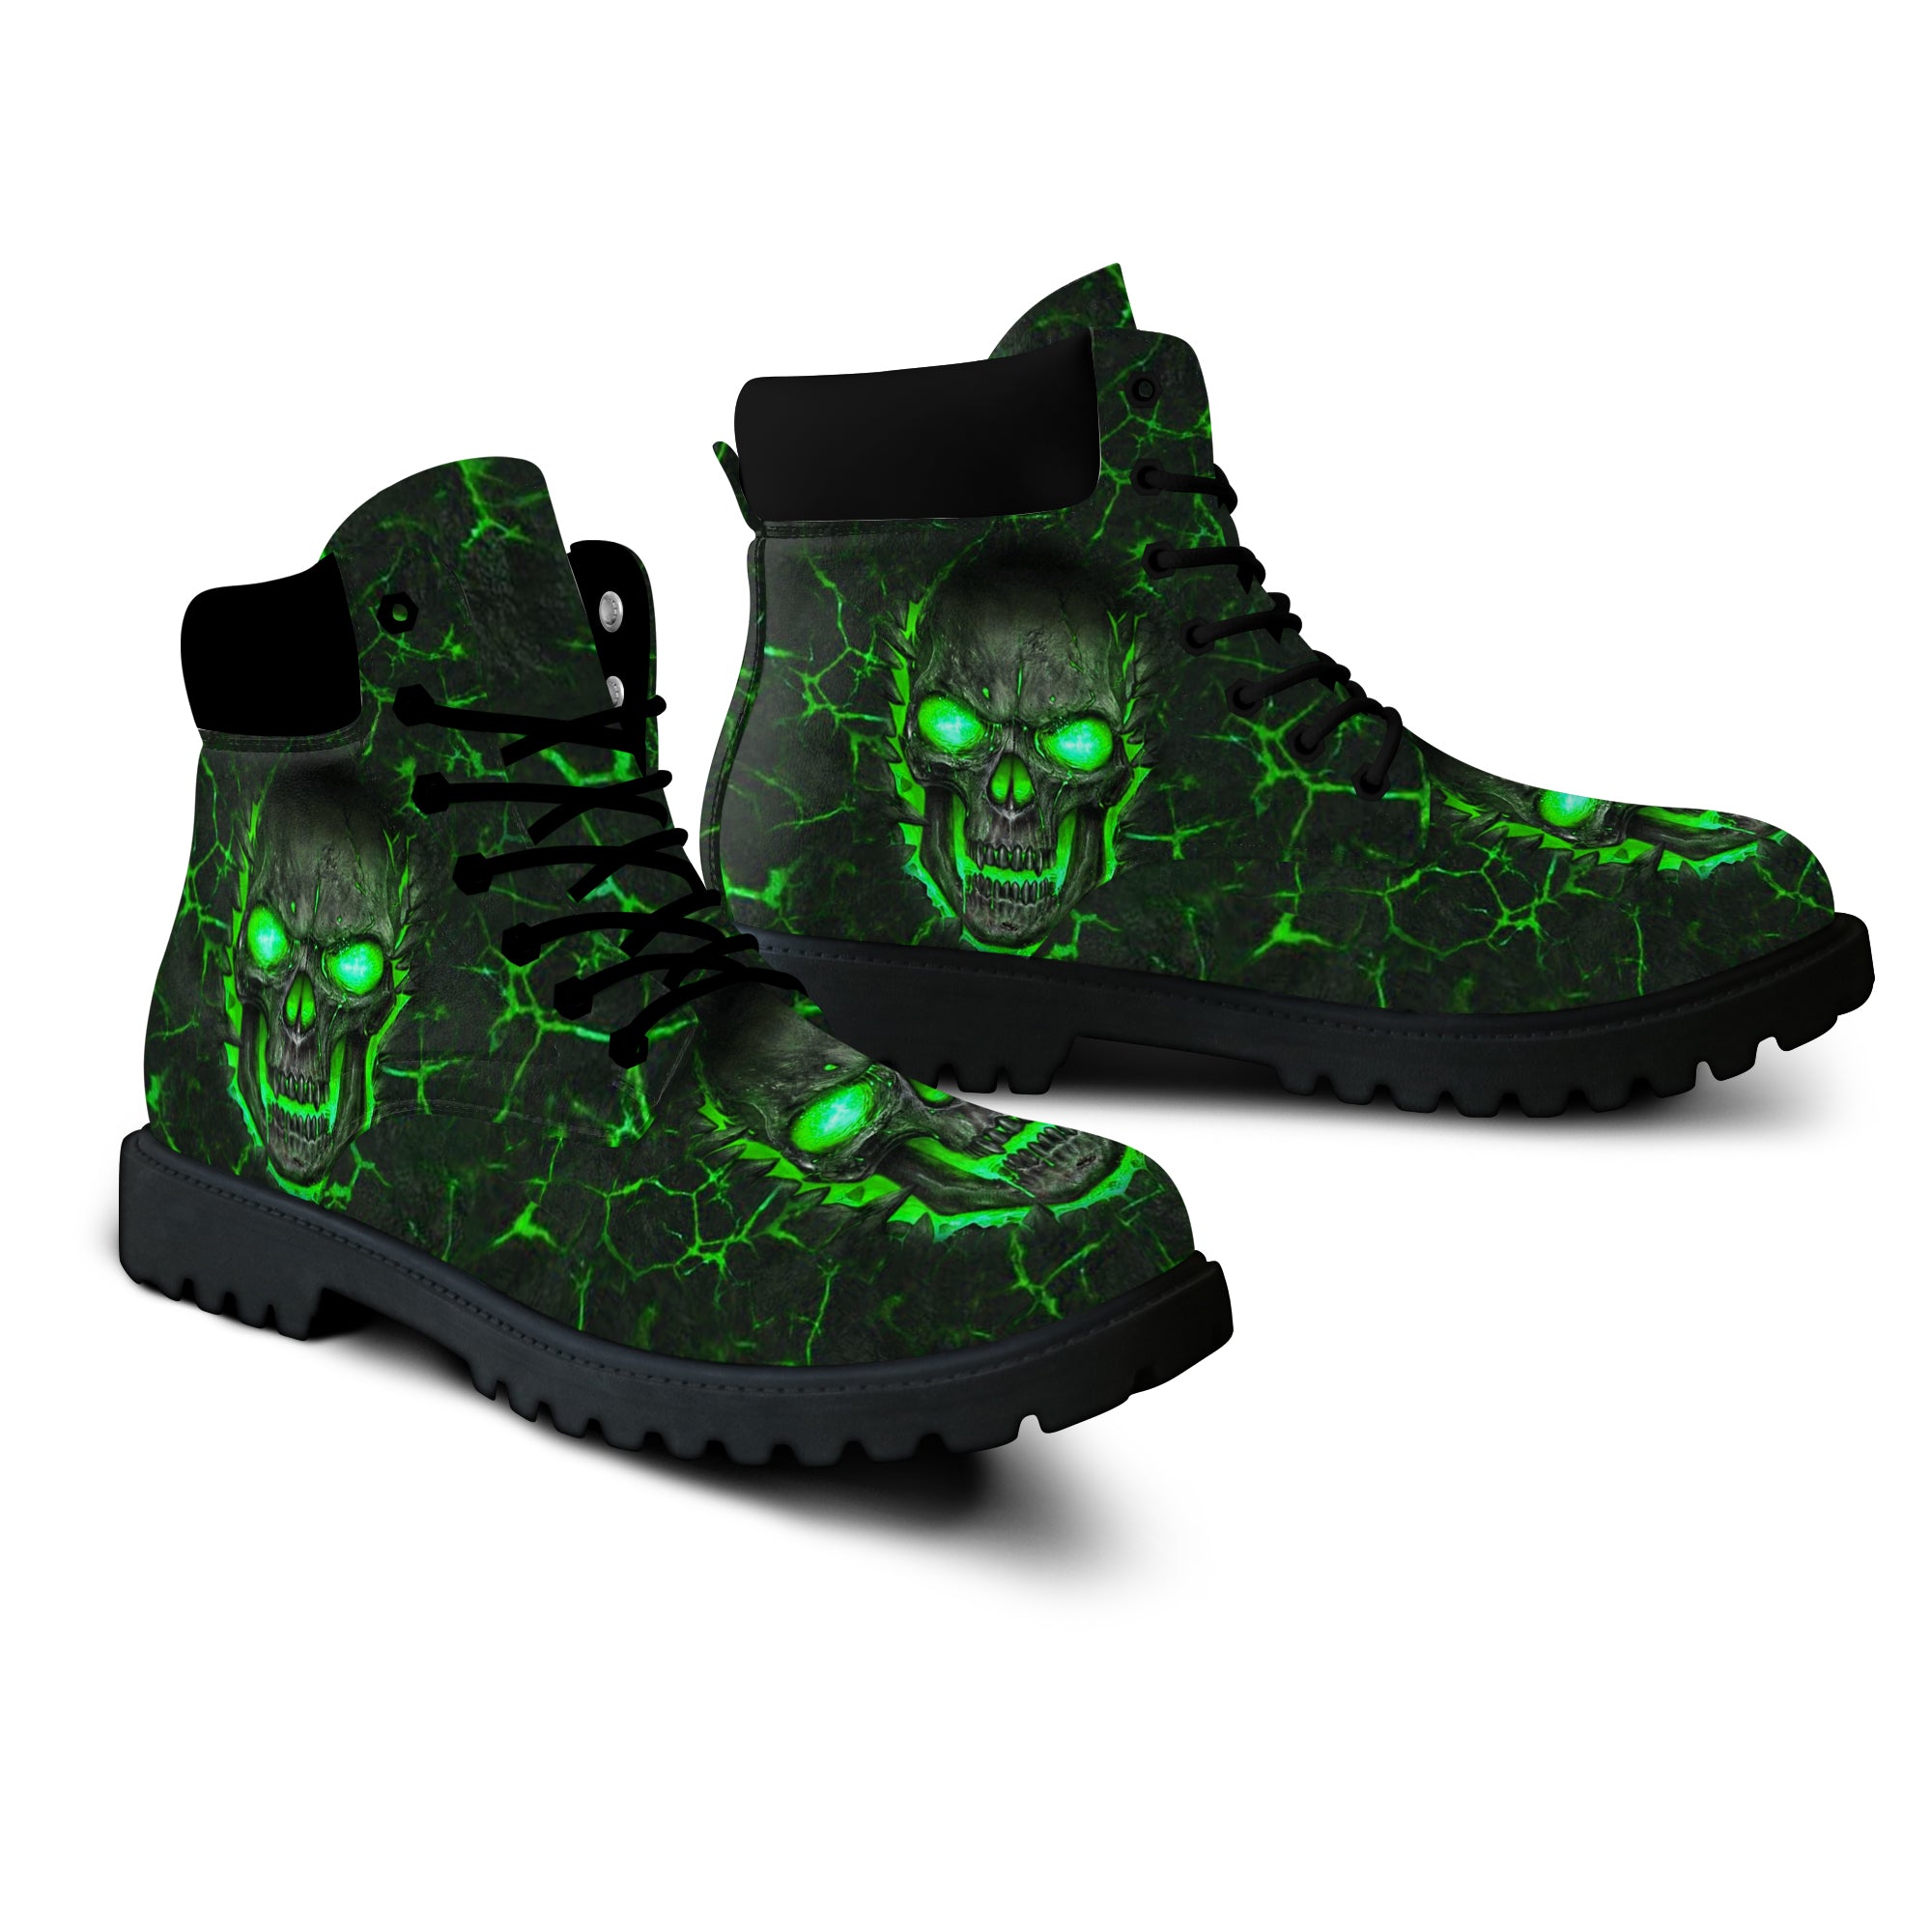 Skull Fire All Season Boots Gothic Shoes Heavy Metal Boots 08978